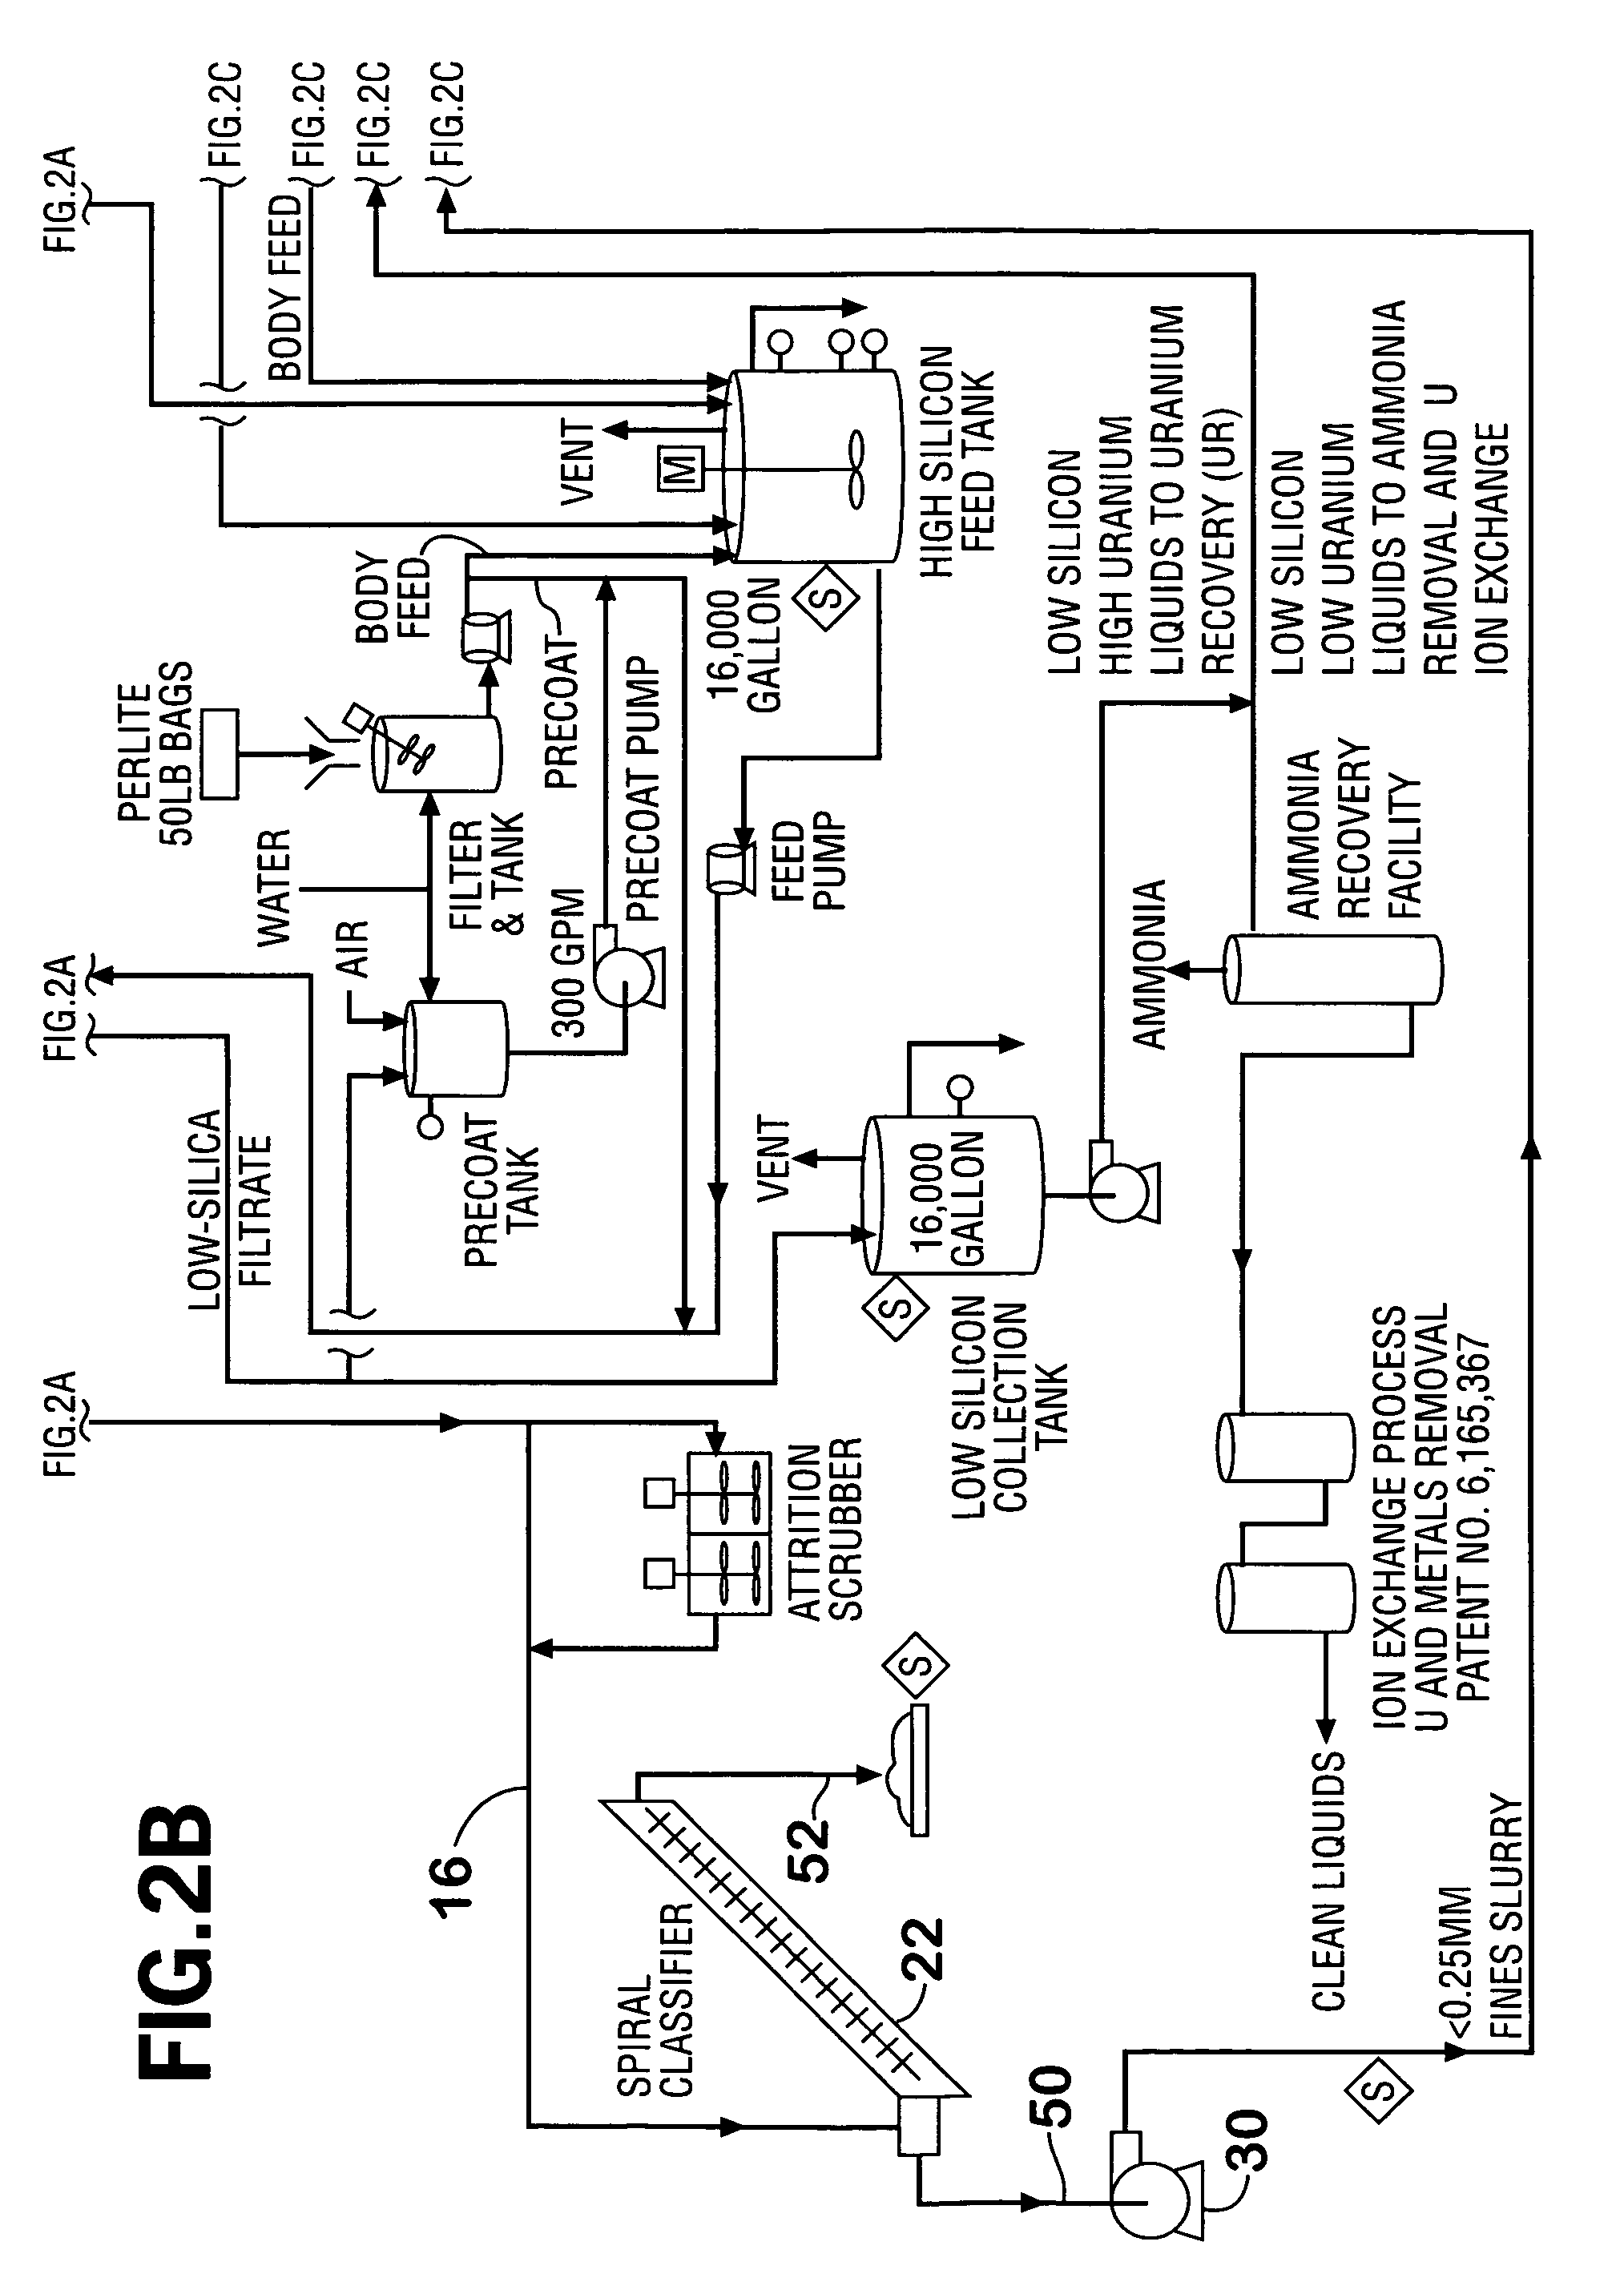 Apparatus and method for aiding in the removal of enriched uranium from soils